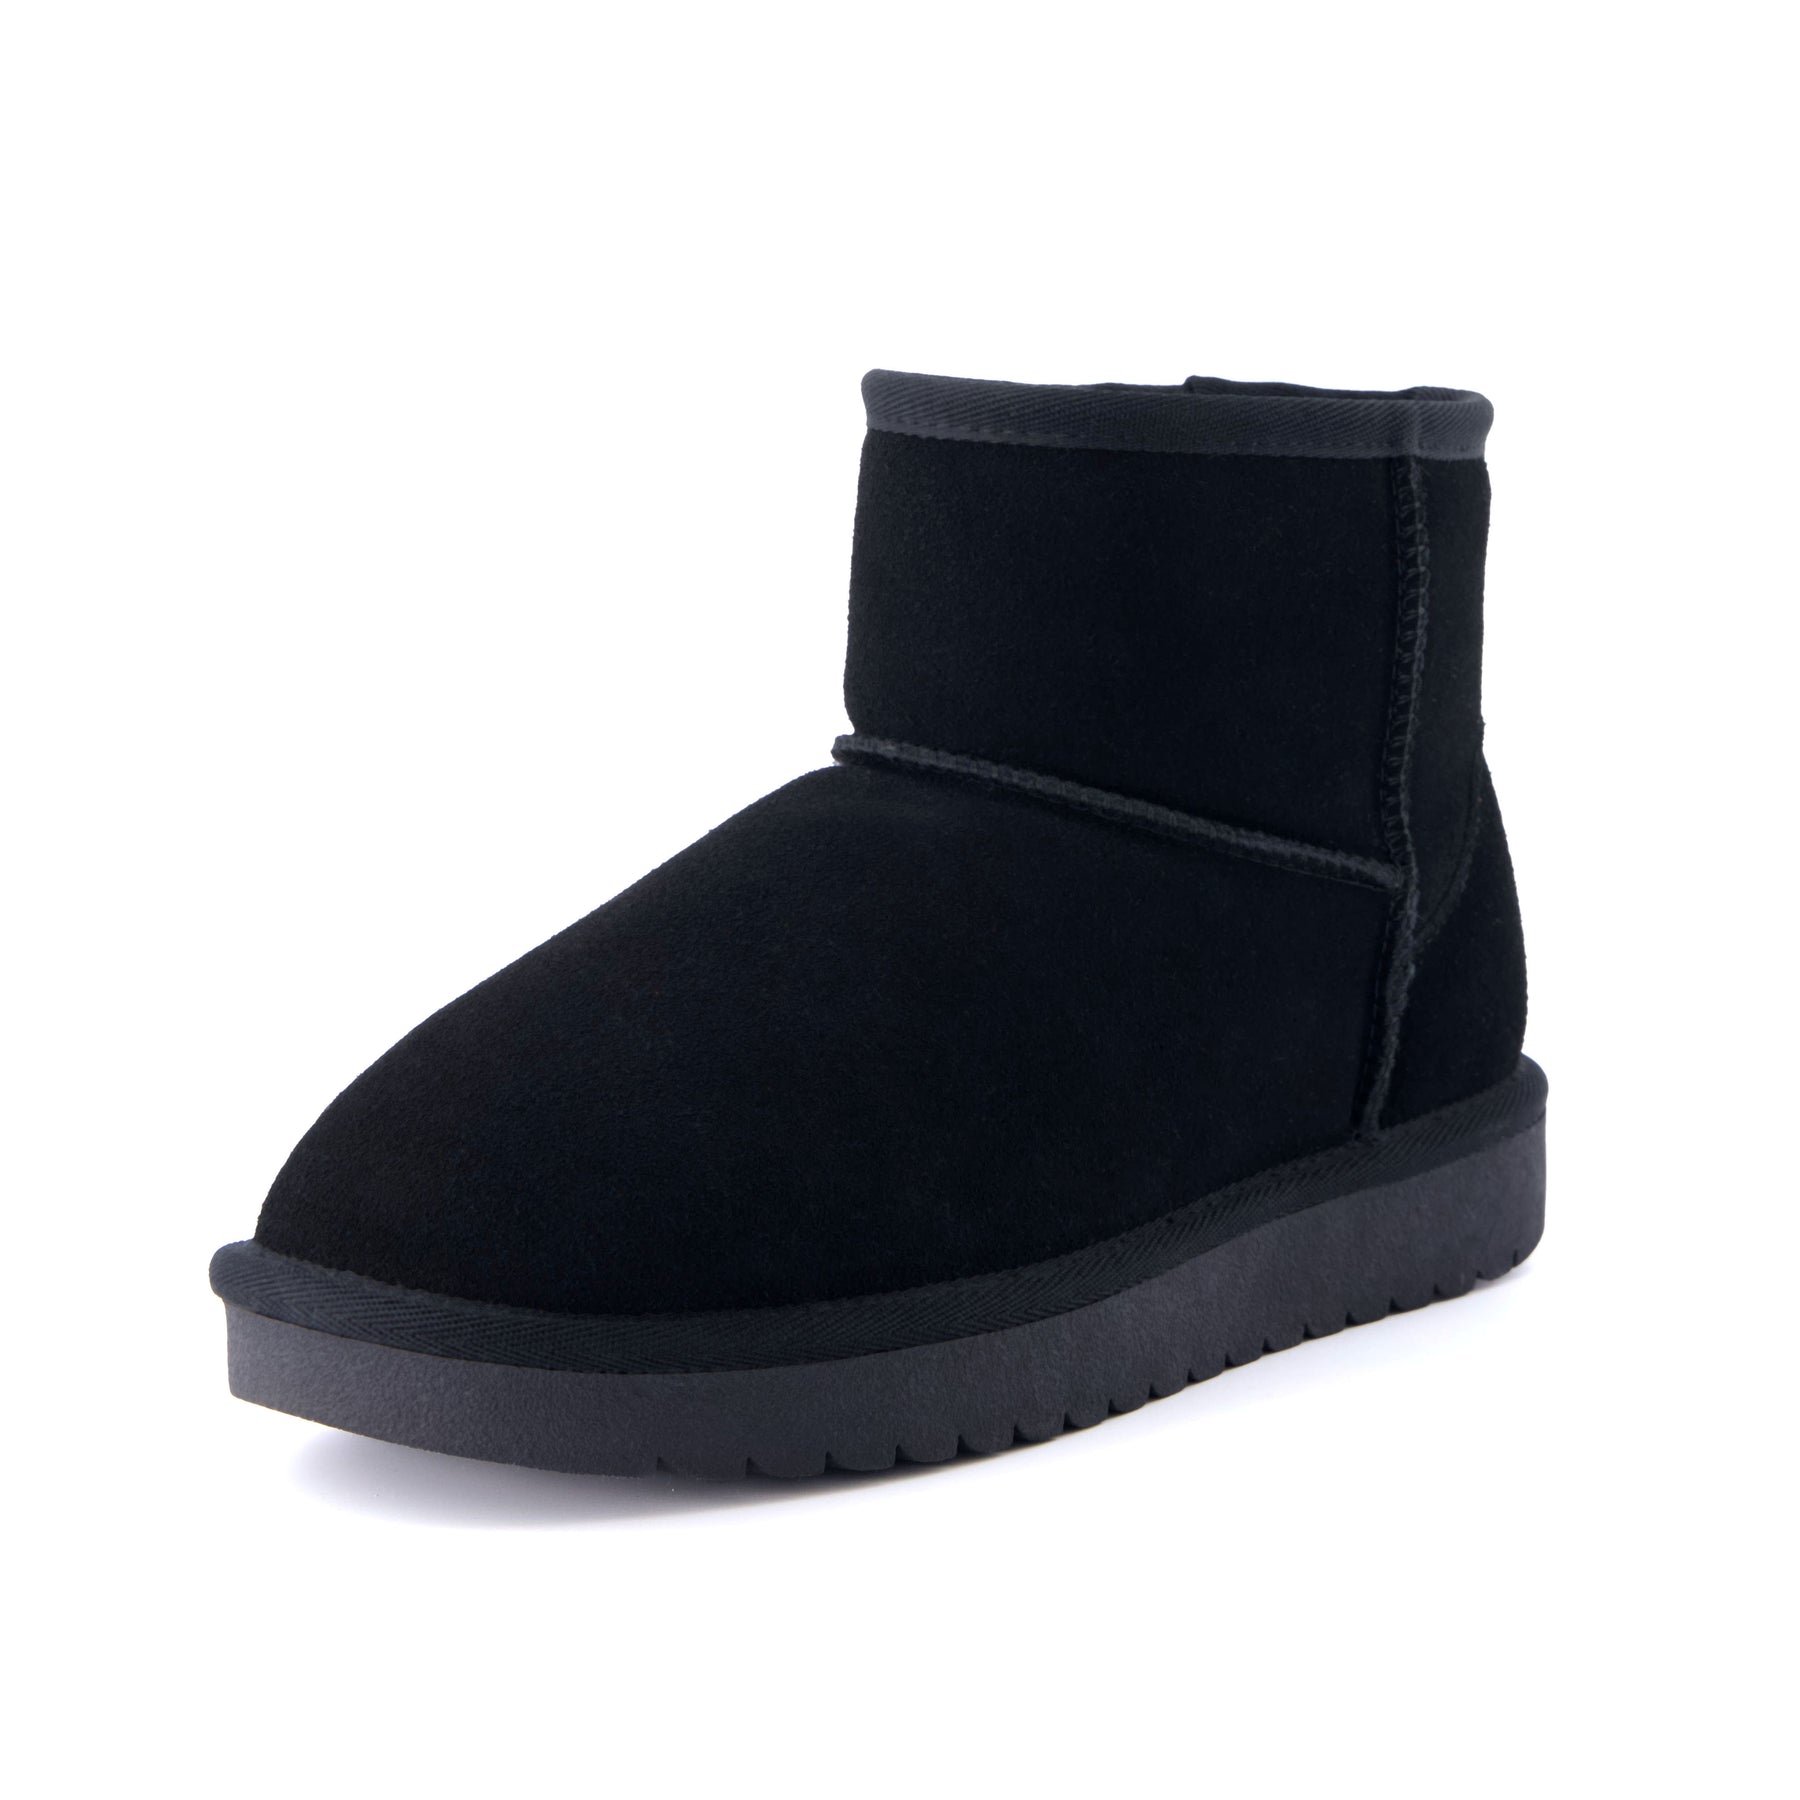 Cushionaire Women's Hipster Cozy Ankle Boot